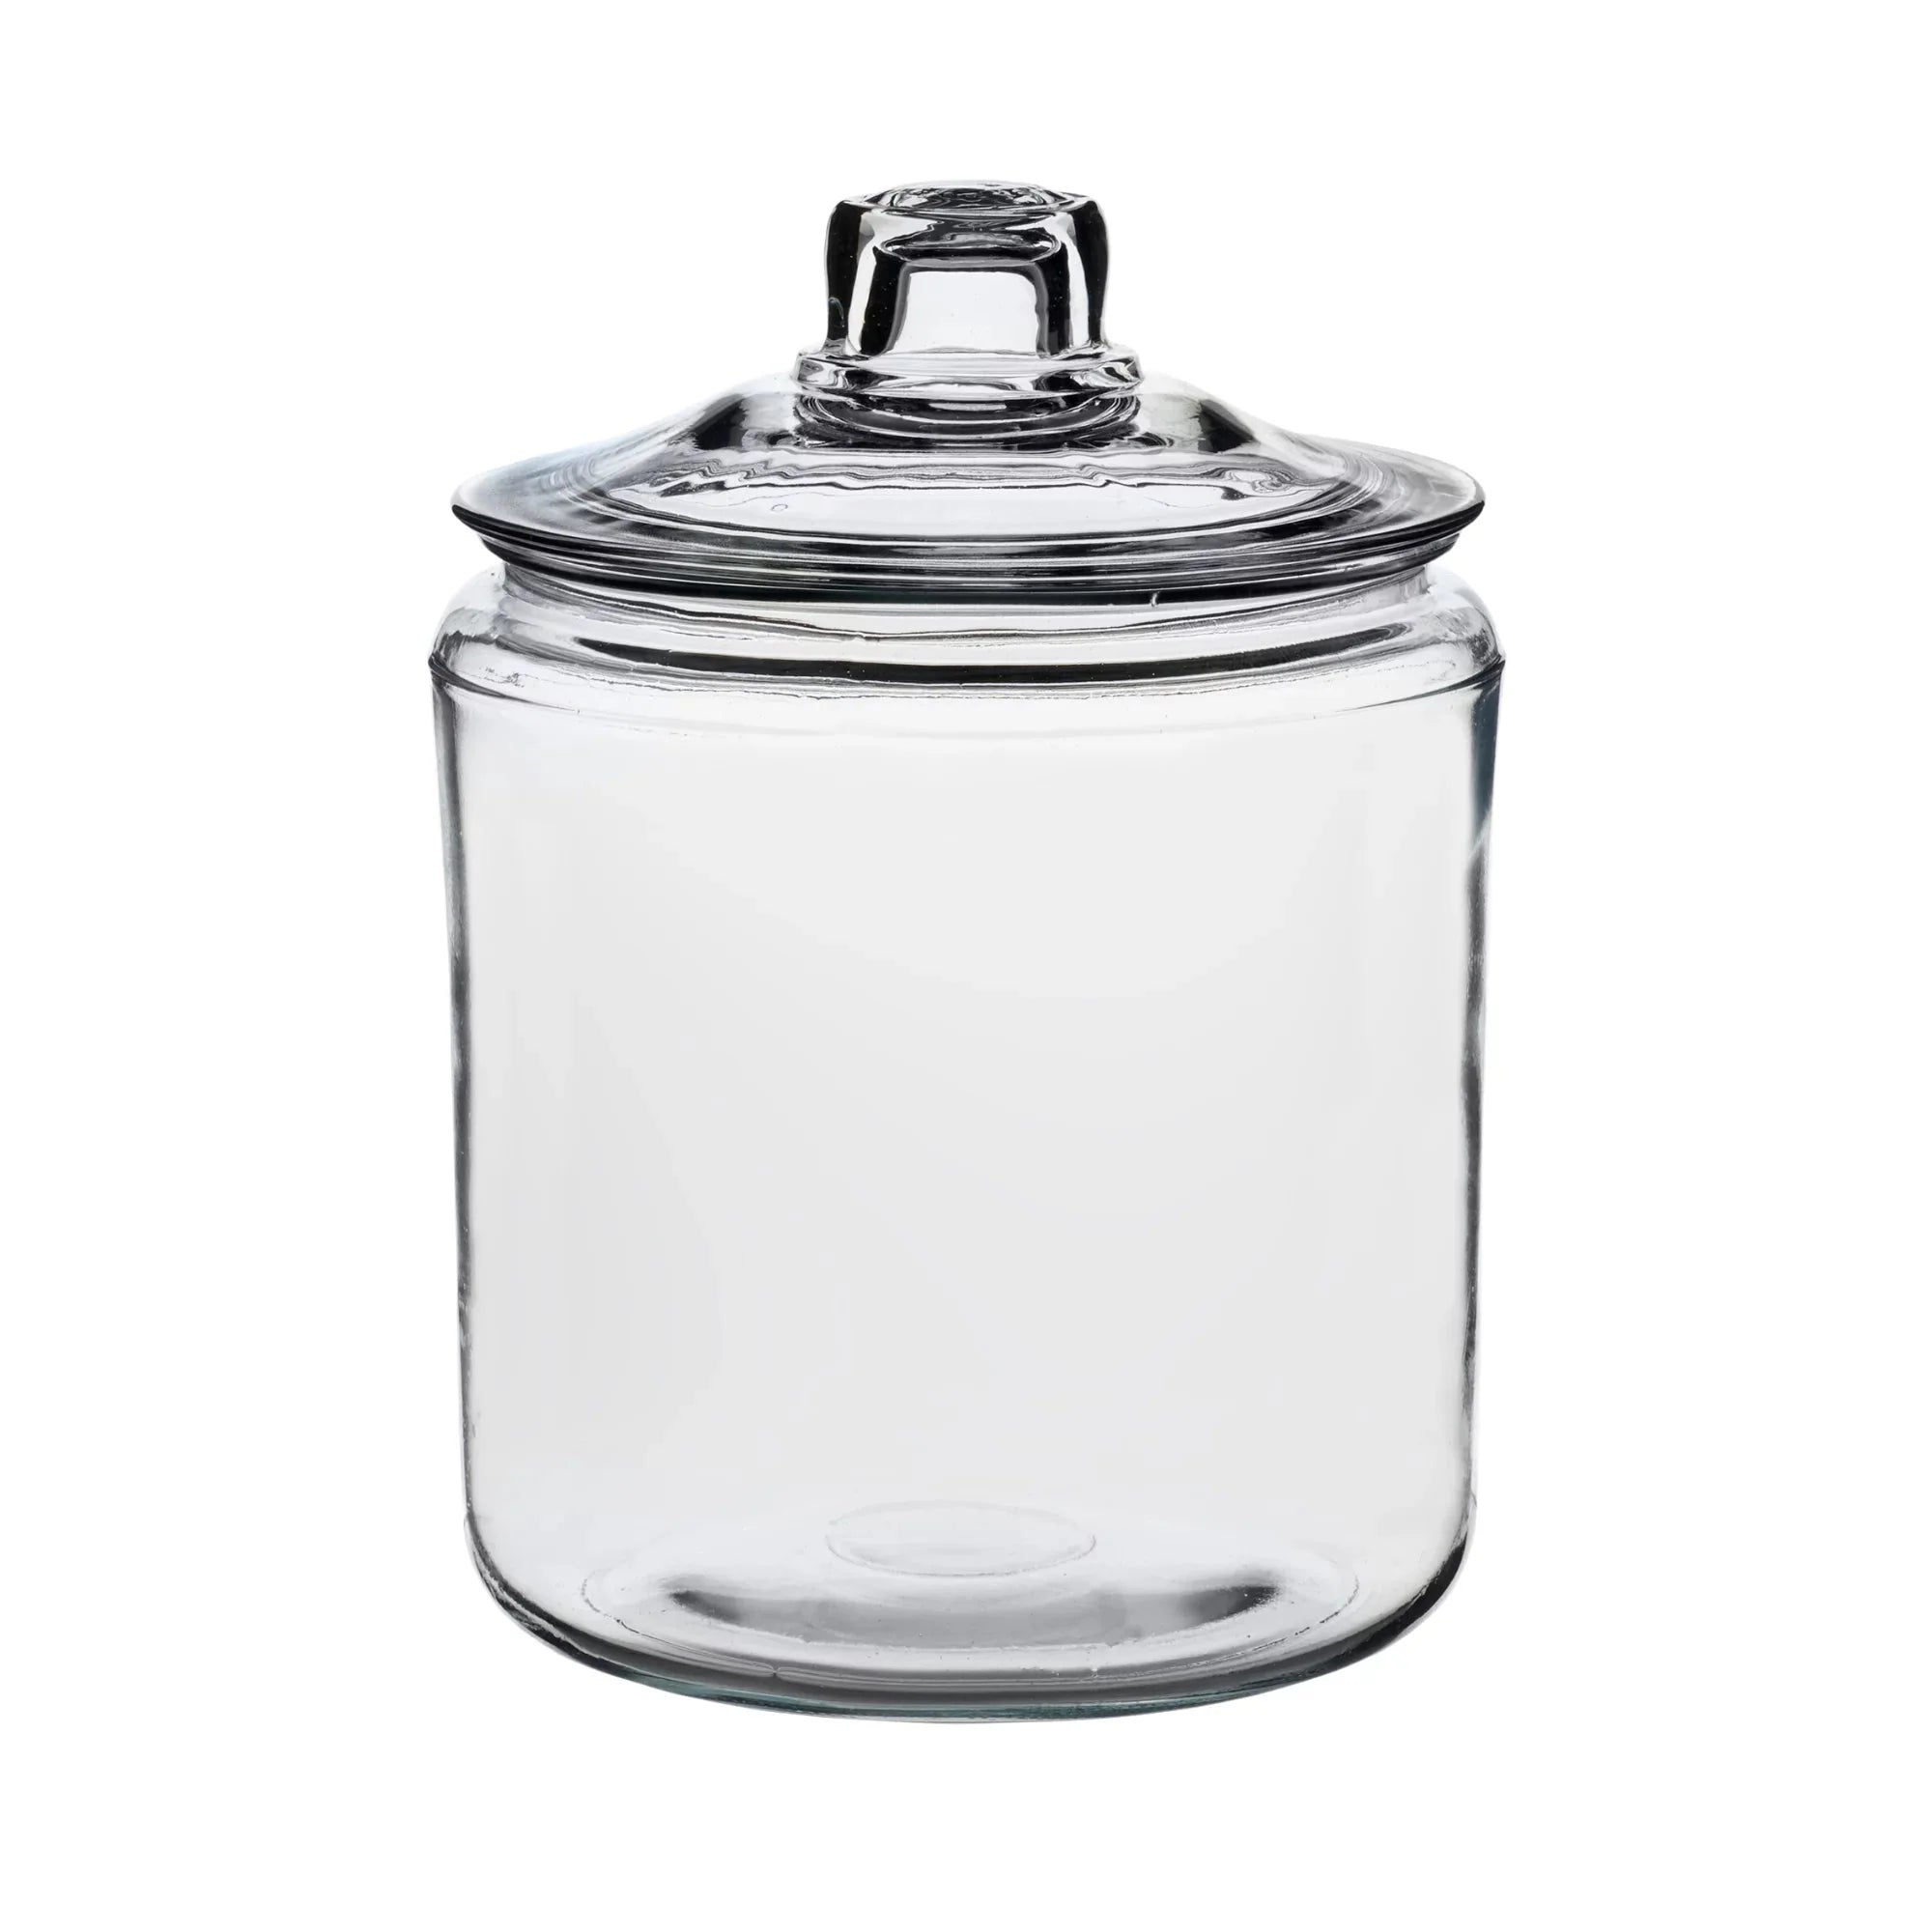 Wholesale prices with free shipping all over United States Anchor Hocking Heritage Hill Glass Jar with Lid, 1 Gallon - Steven Deals